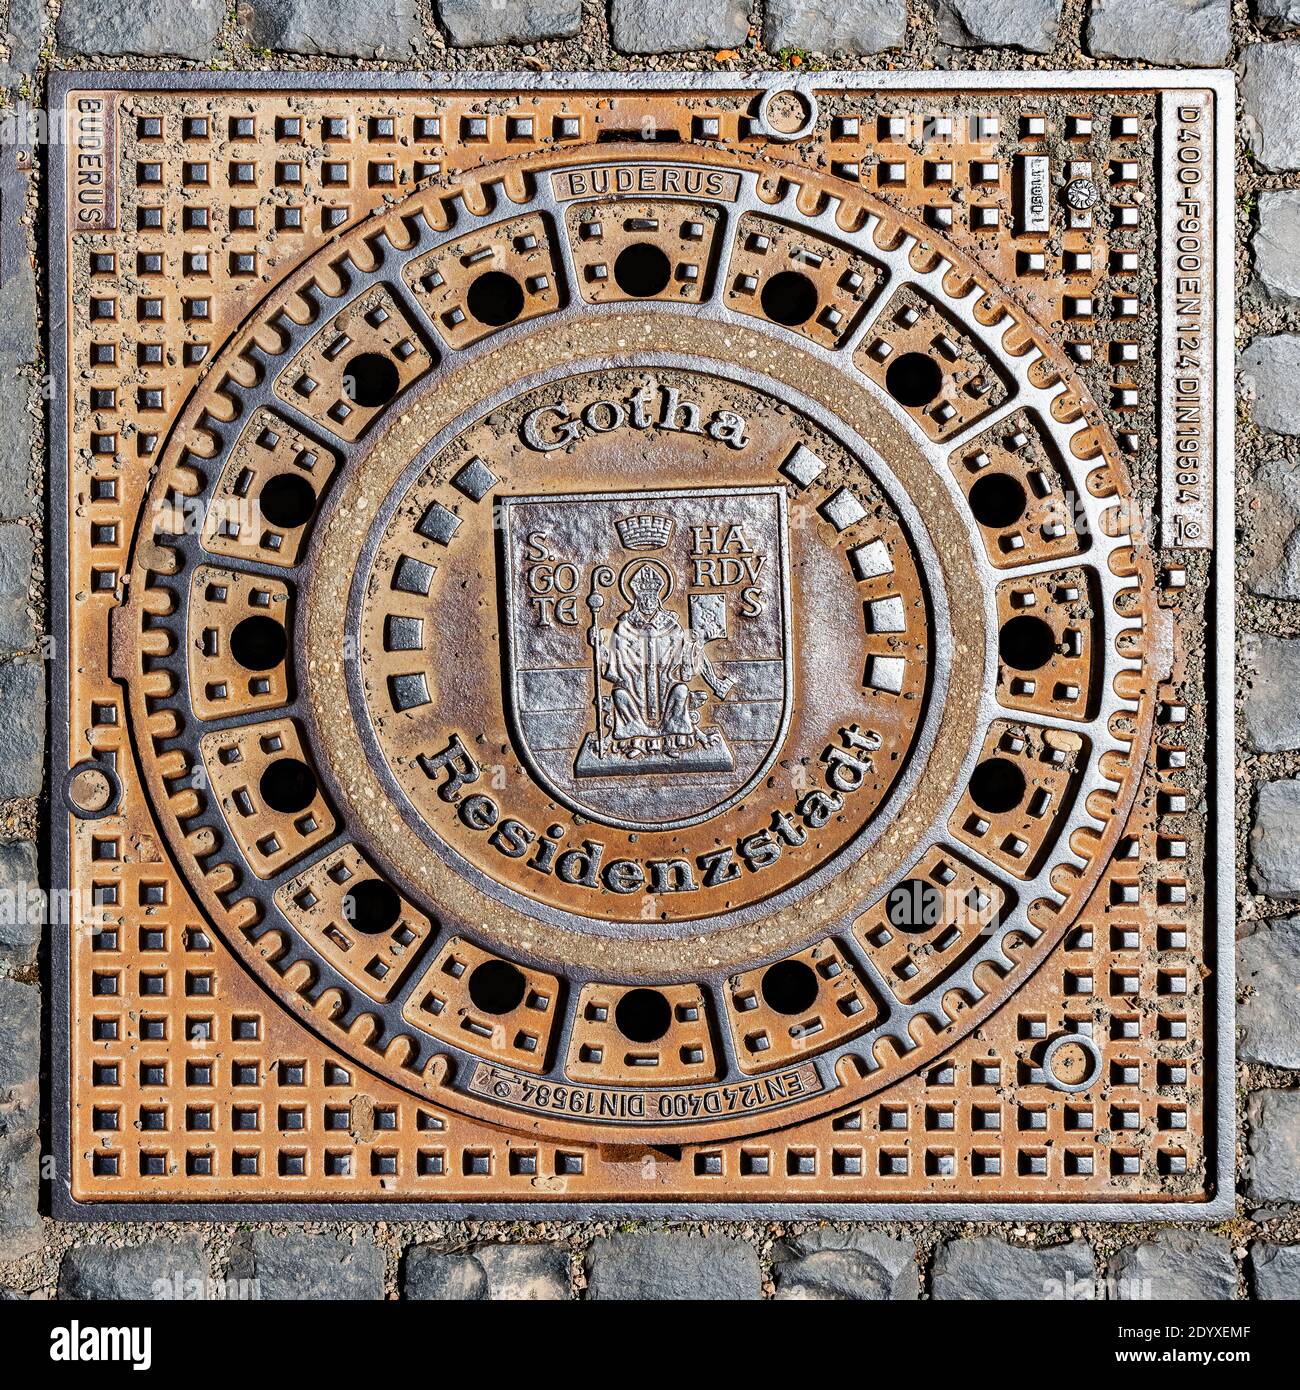 Manhole cover in Gotha with the Coat of arms of Gotha, Thuringia, Germany, Europe Stock Photo